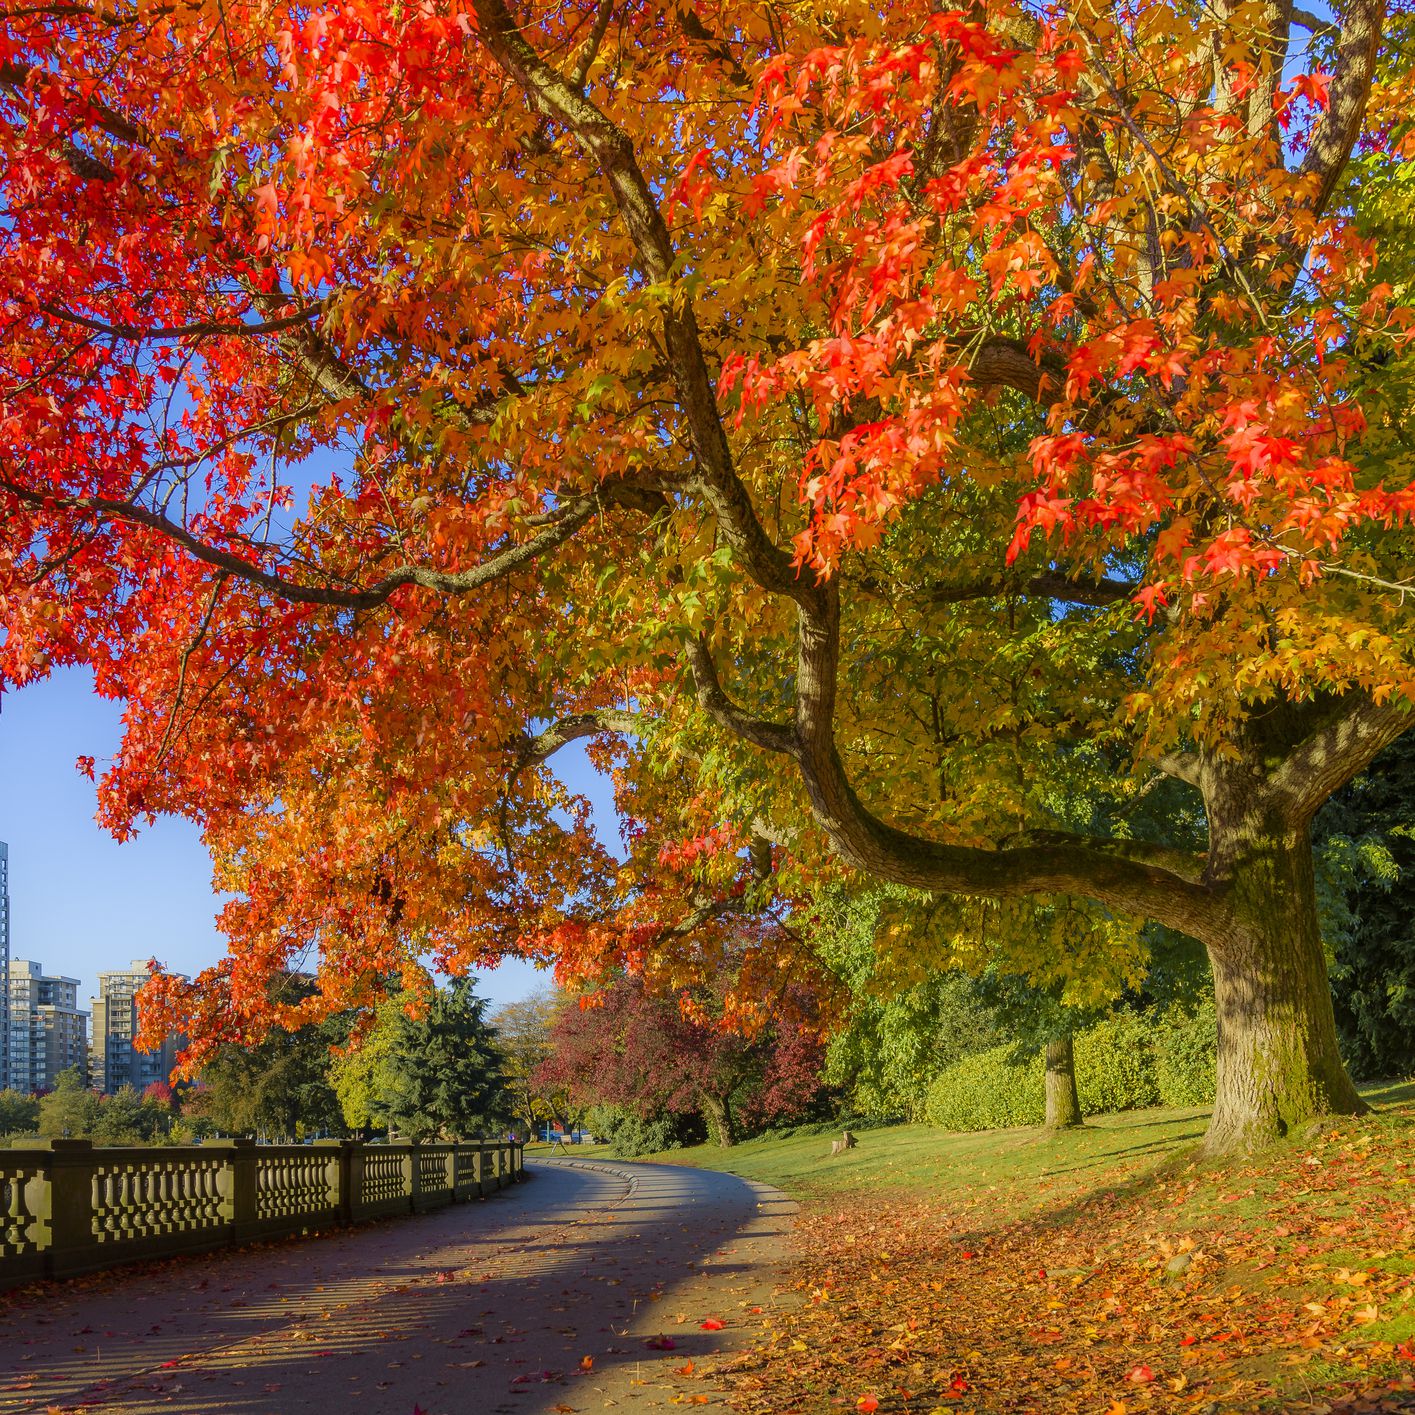 fall-colour--stanley-park-seawall--vancouver--british-columbia--canada--879671352-5a77c1c8642dca0037b05a39.jpg